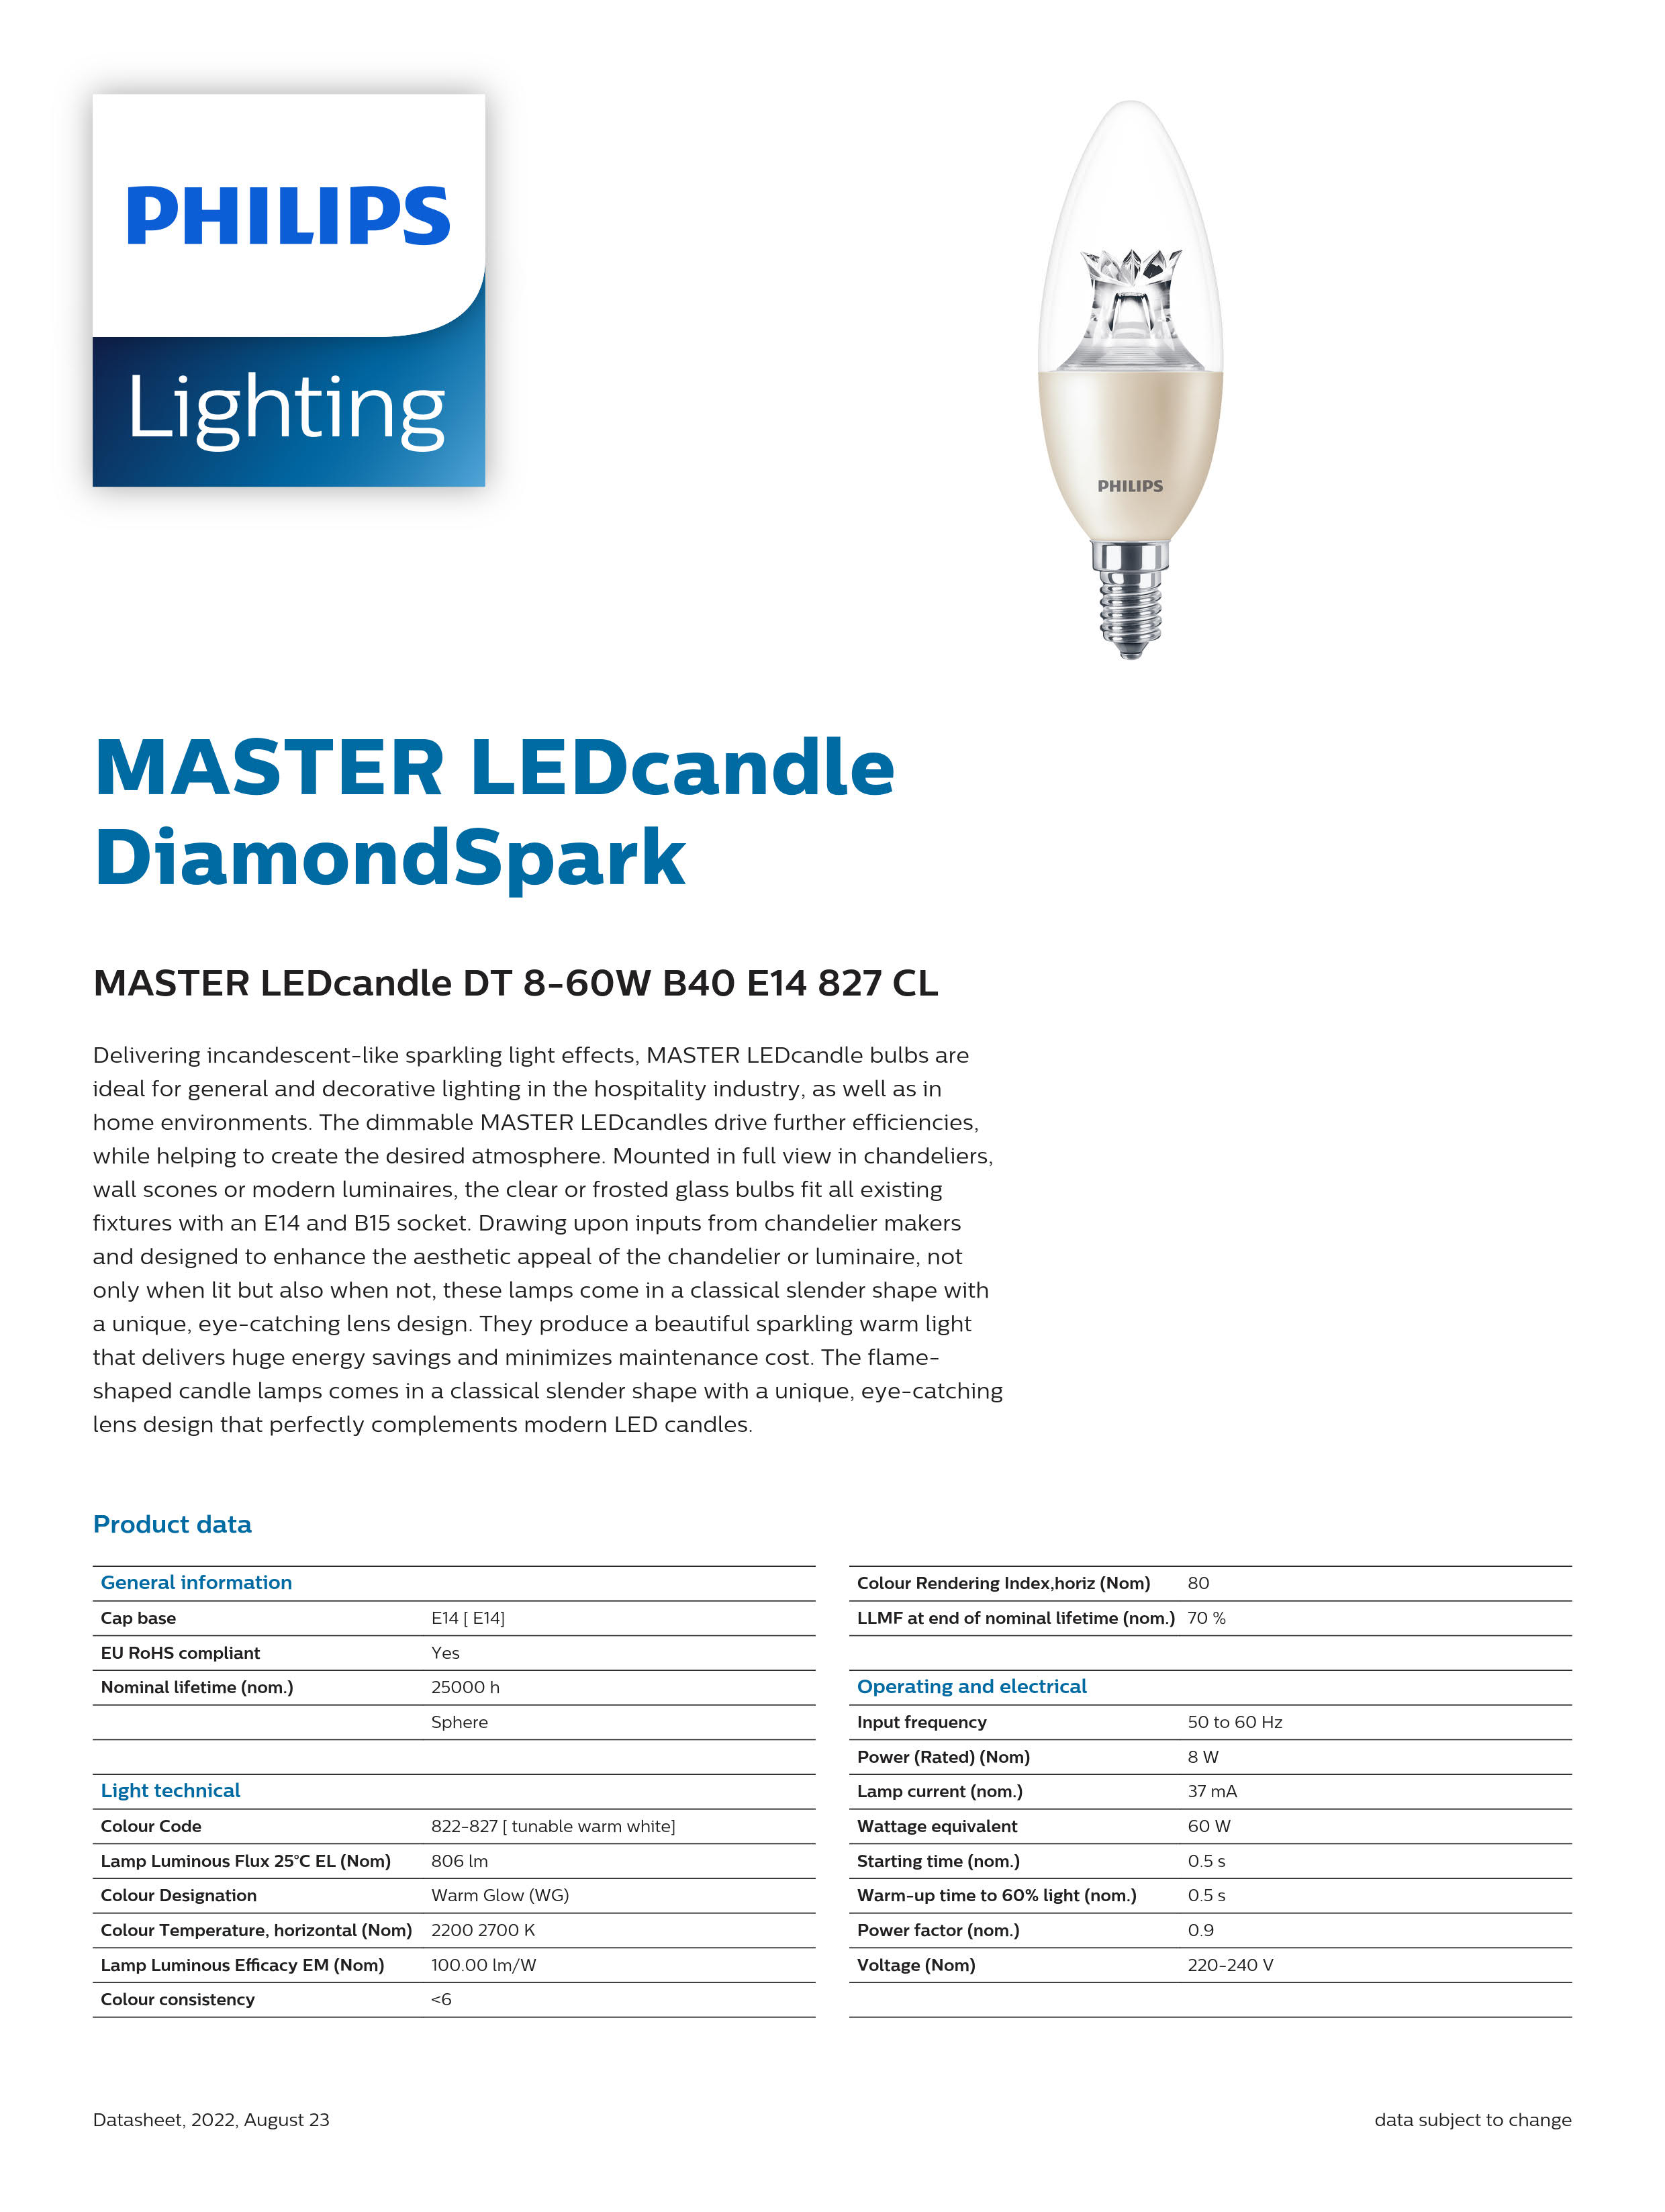 Philips dimmable bulb MASTER LEDcandle DT 8-60W B40 E14 827 CL 929002491702